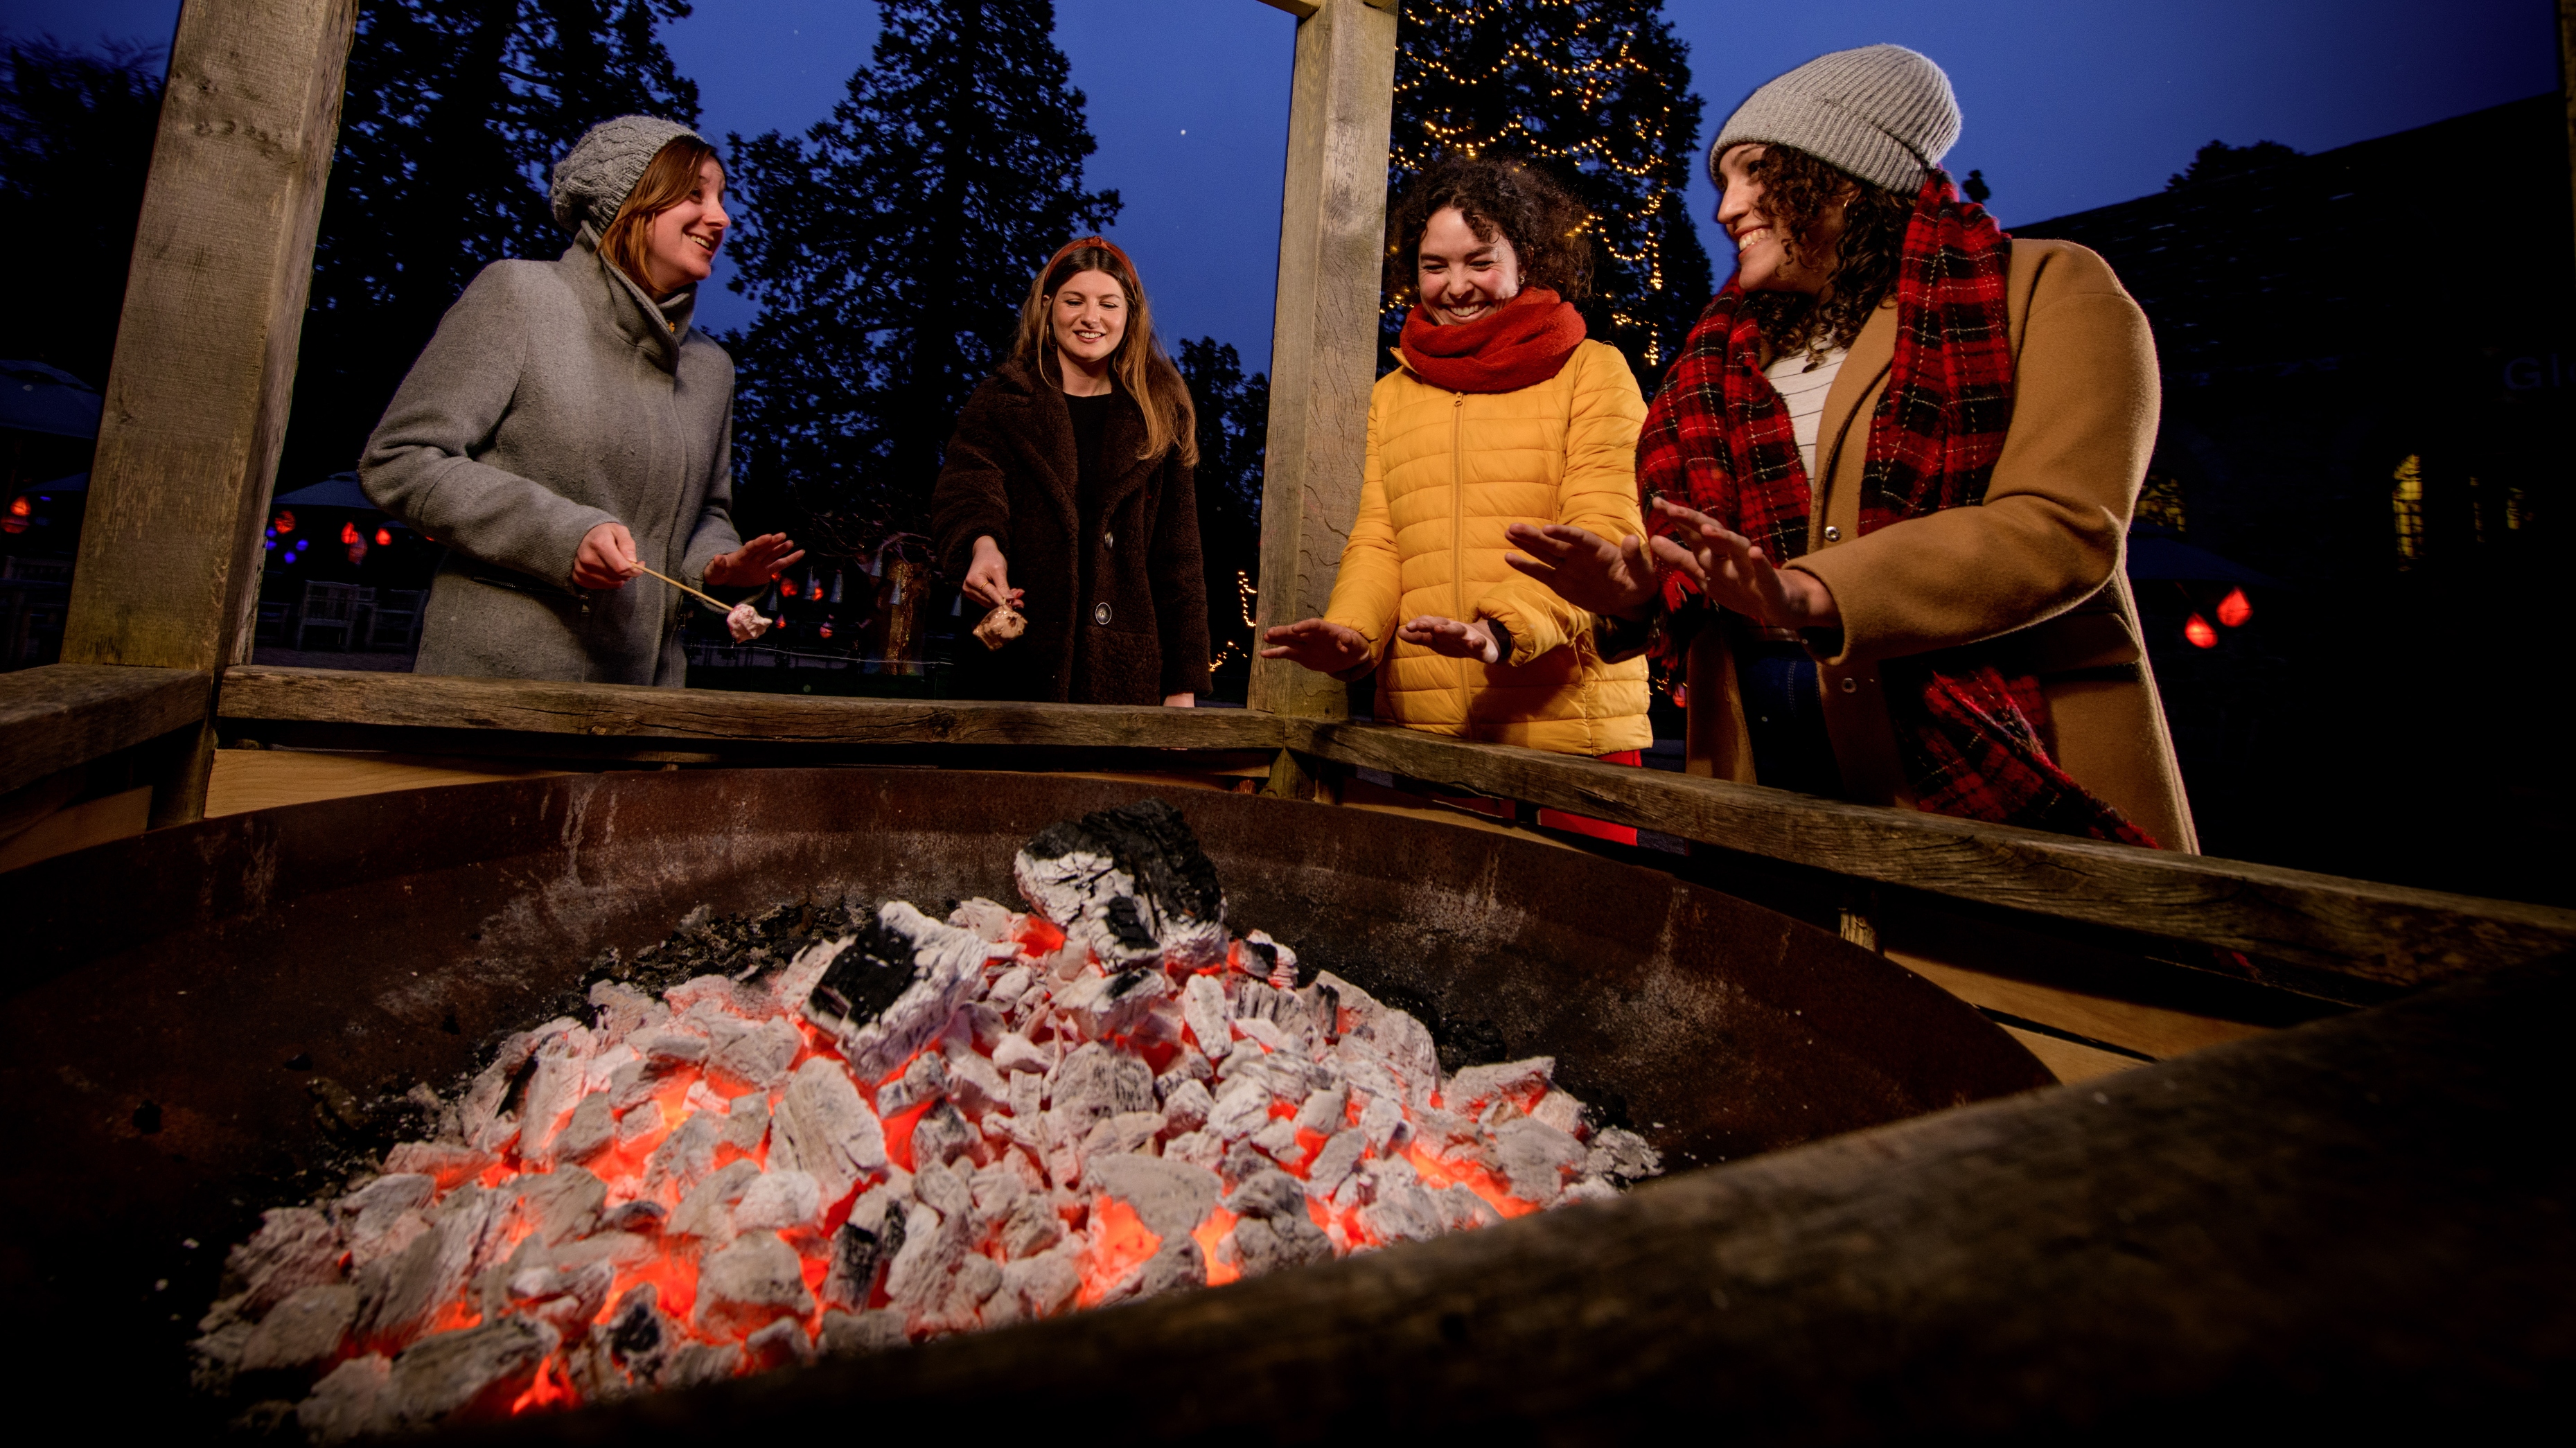 Four people warming their hands or marshmallows over a fire